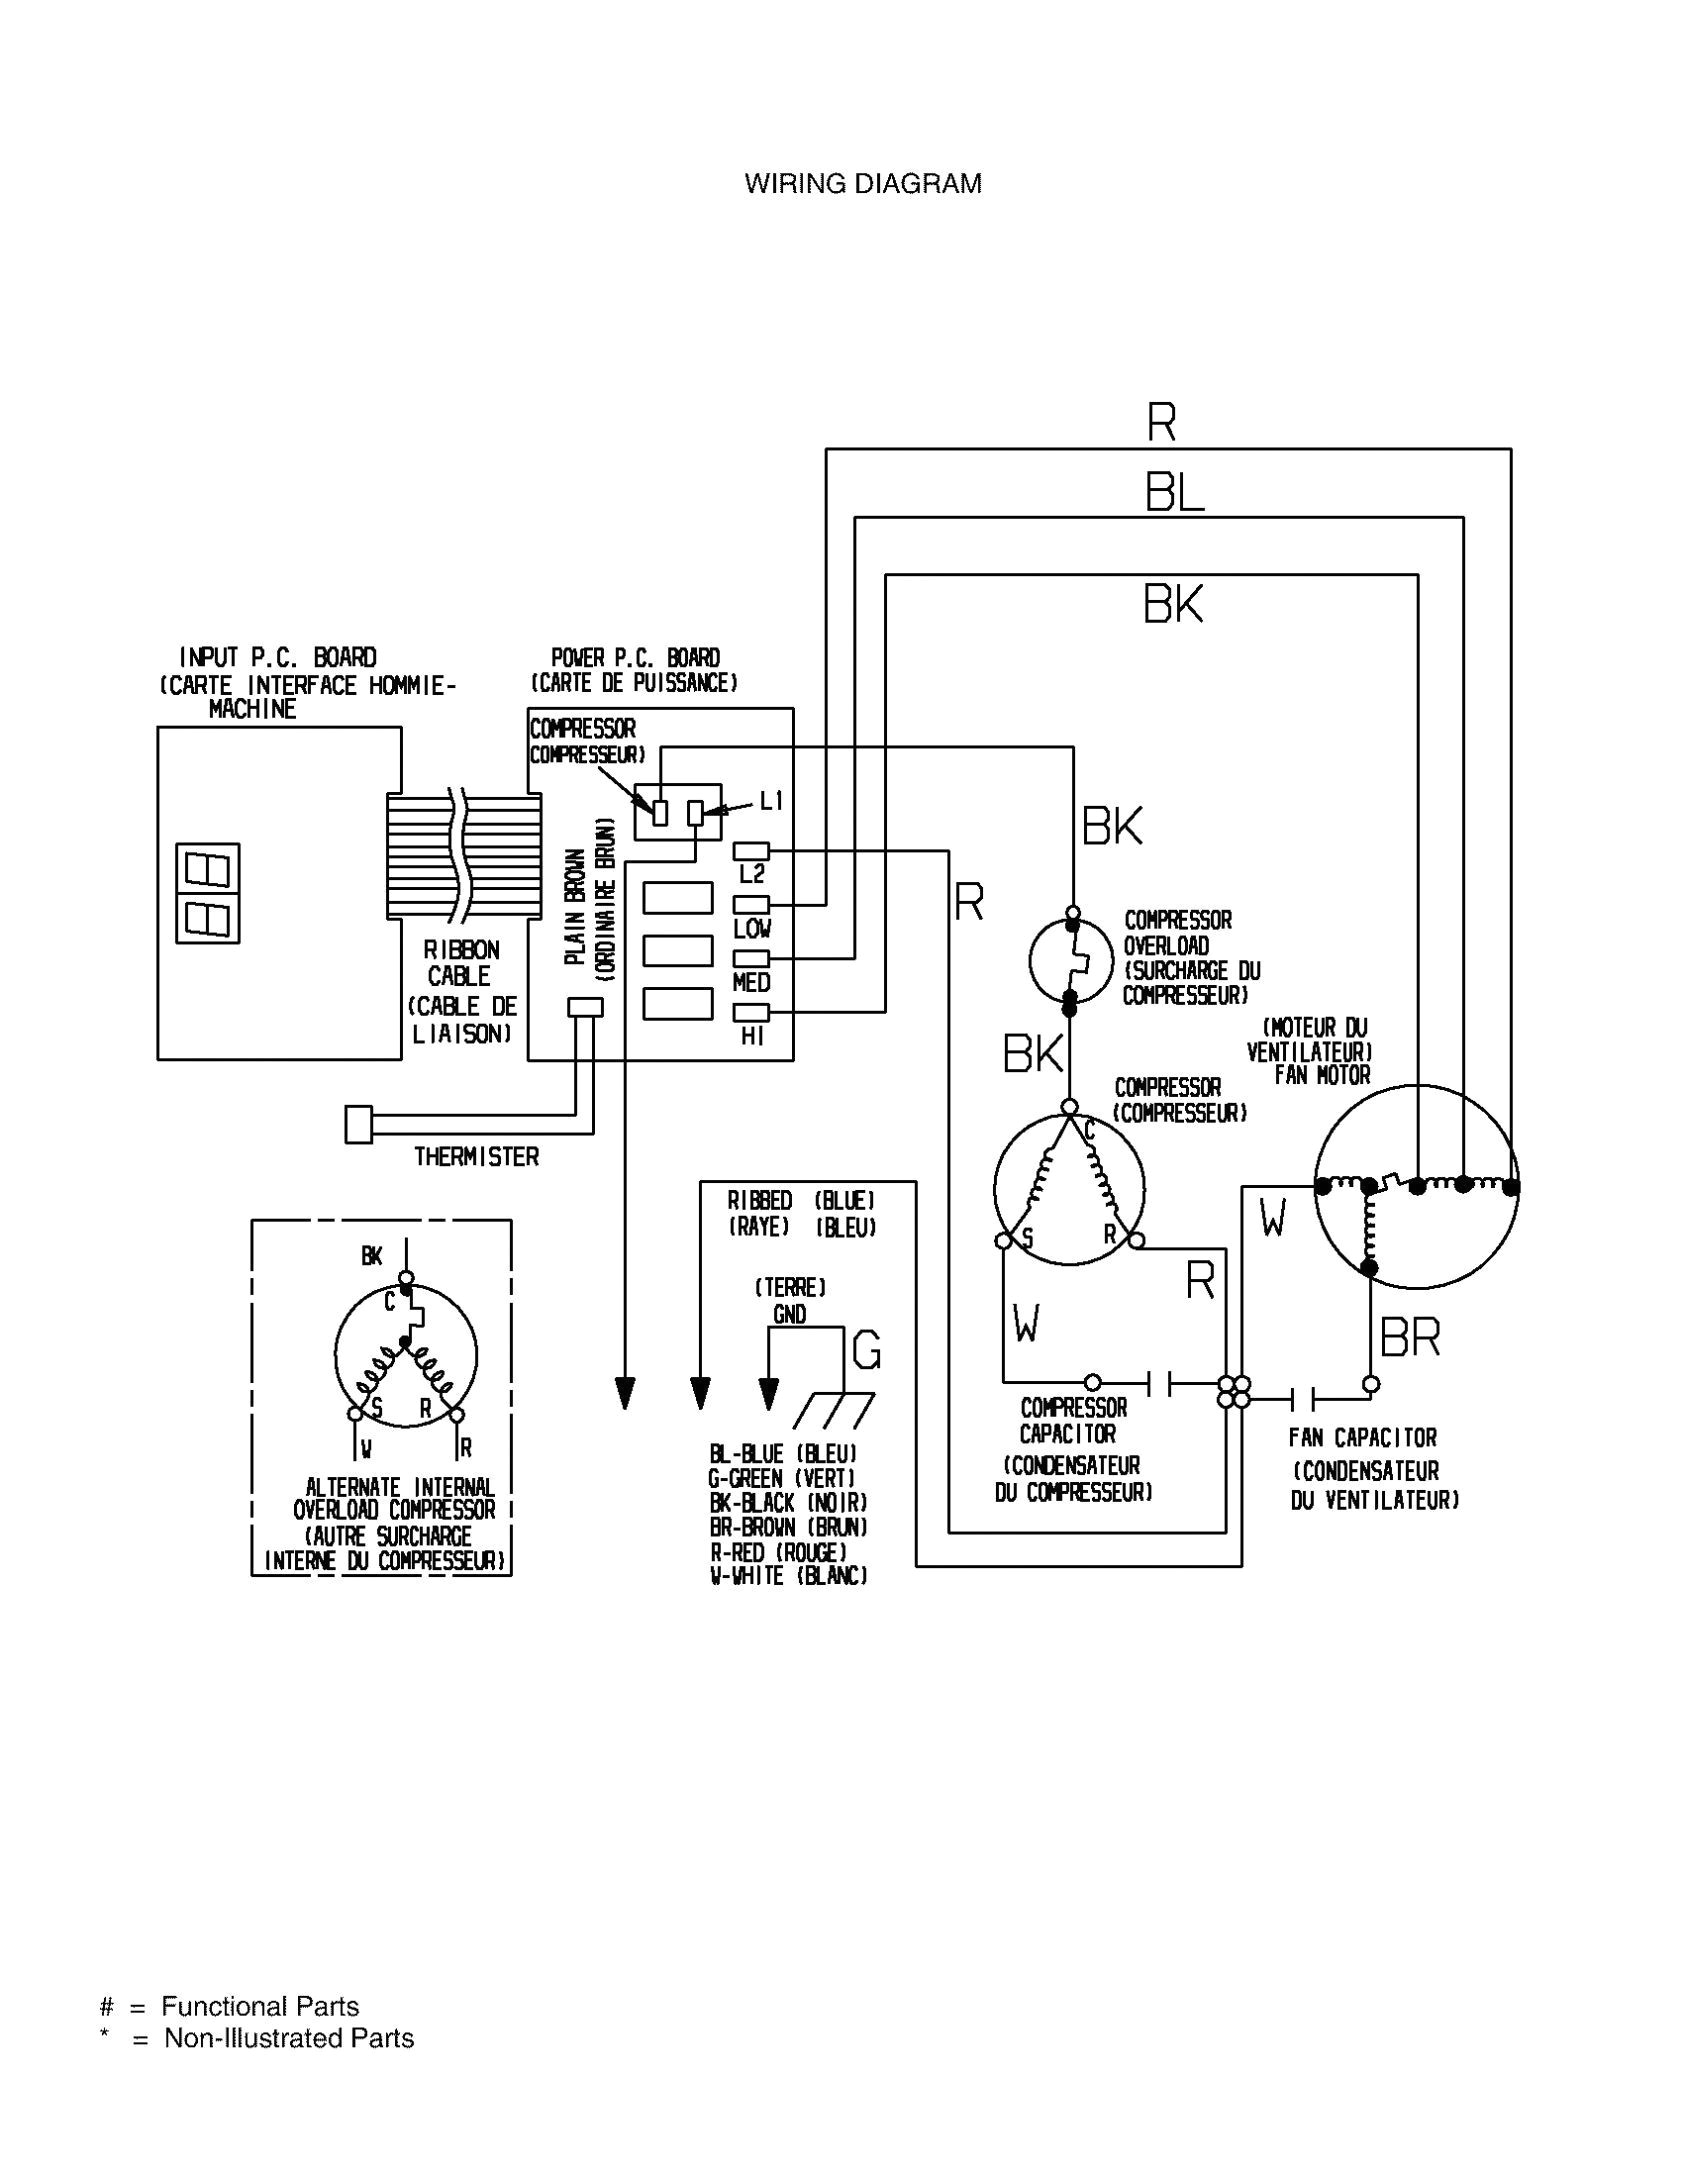 soundactivated tape switch circuit diagram tradeoficcom schema soundactivated ac switch circuit diagram tradeoficcom